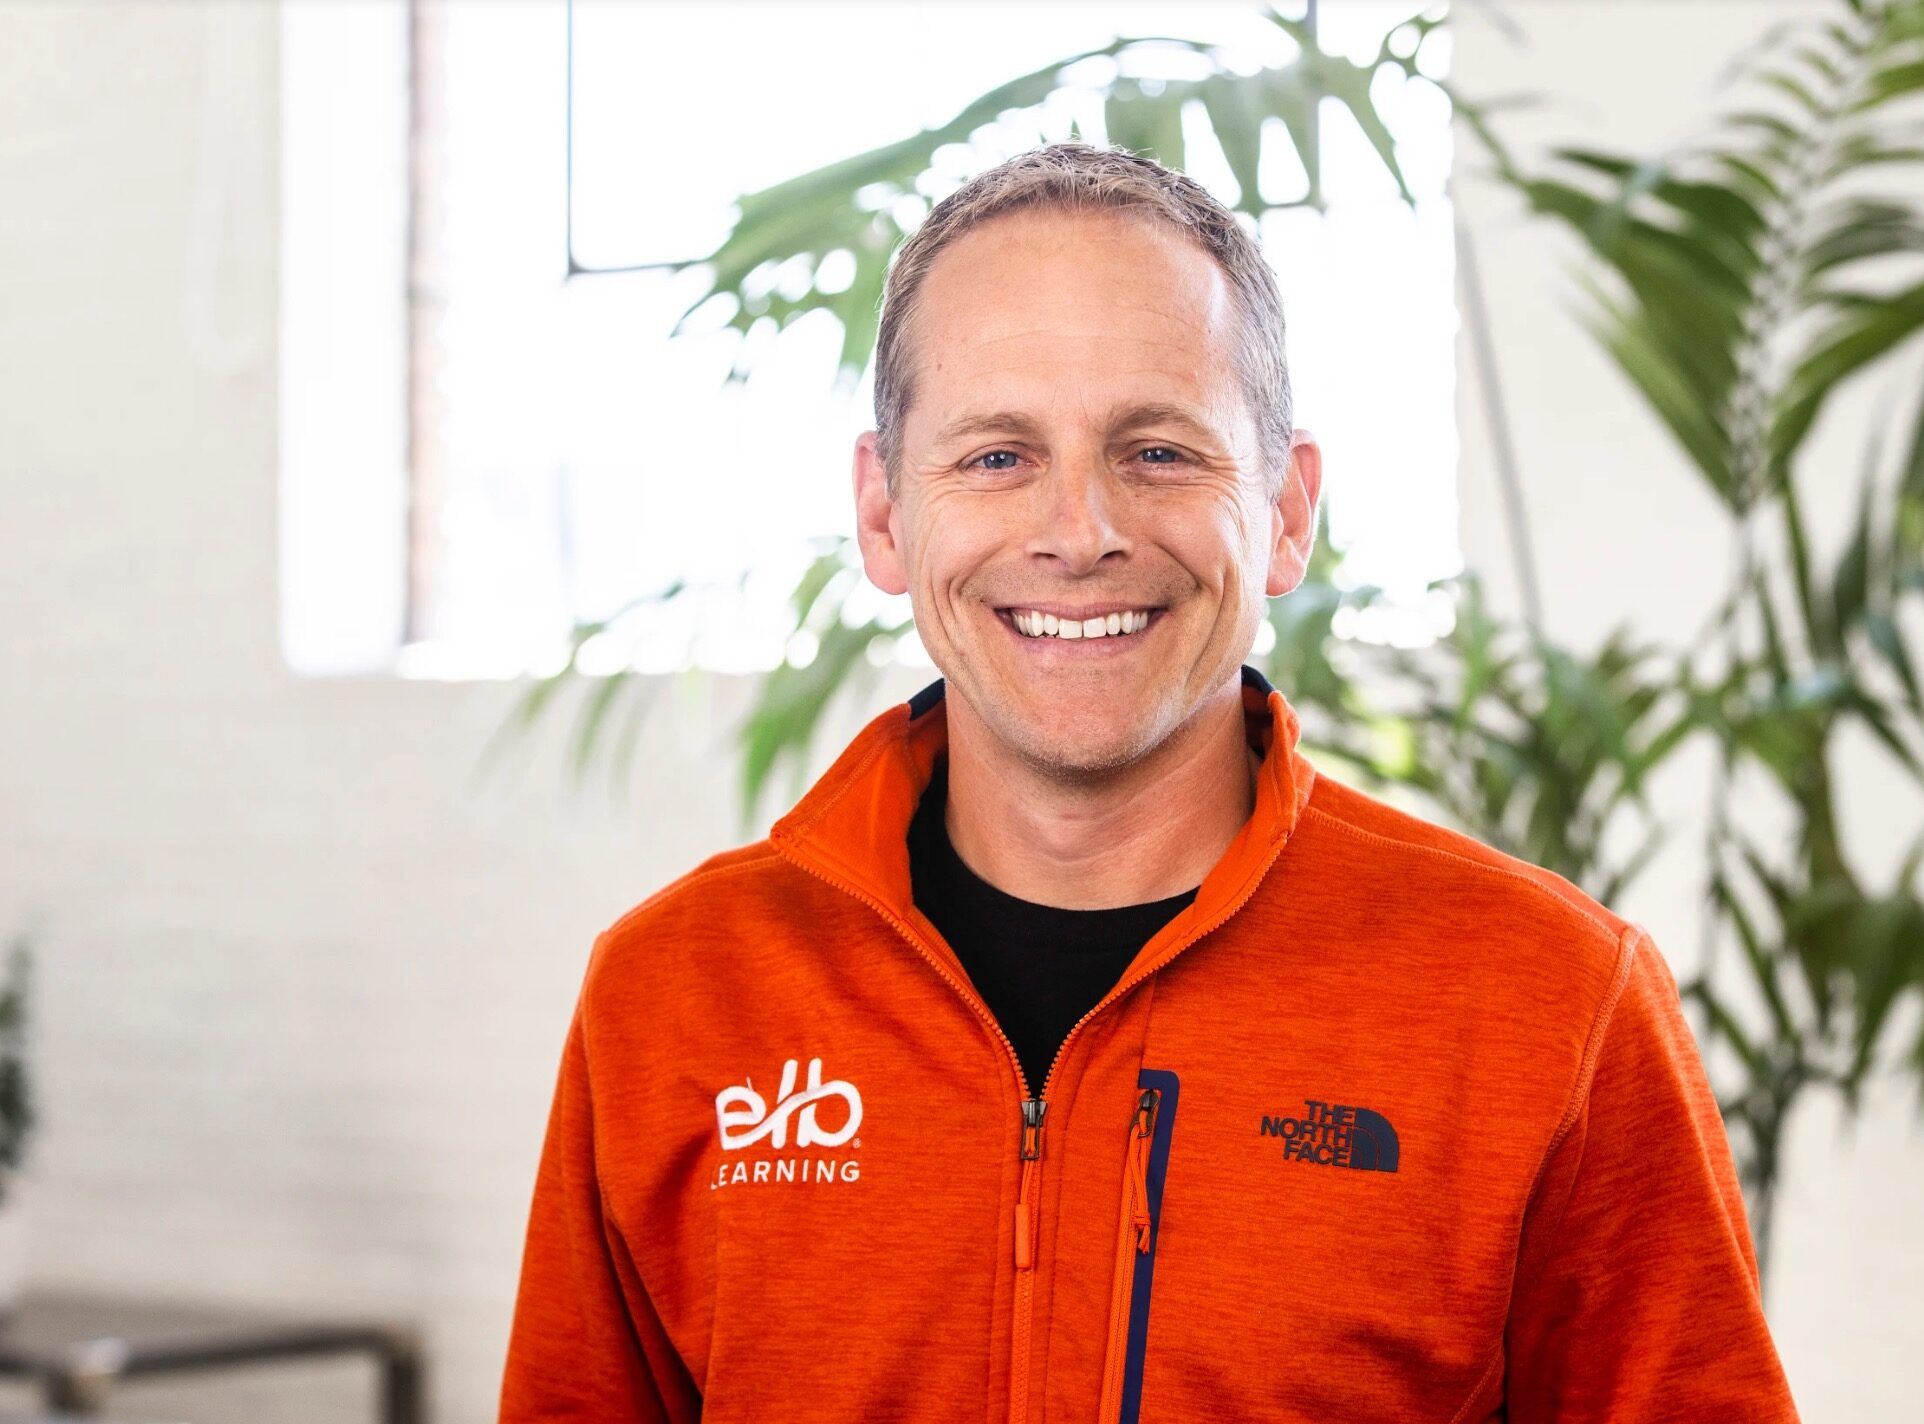 In this edition of the Founder Series, Andrew Scivally shares how he founded ELB Learning, one of the biggest e-learning companies.